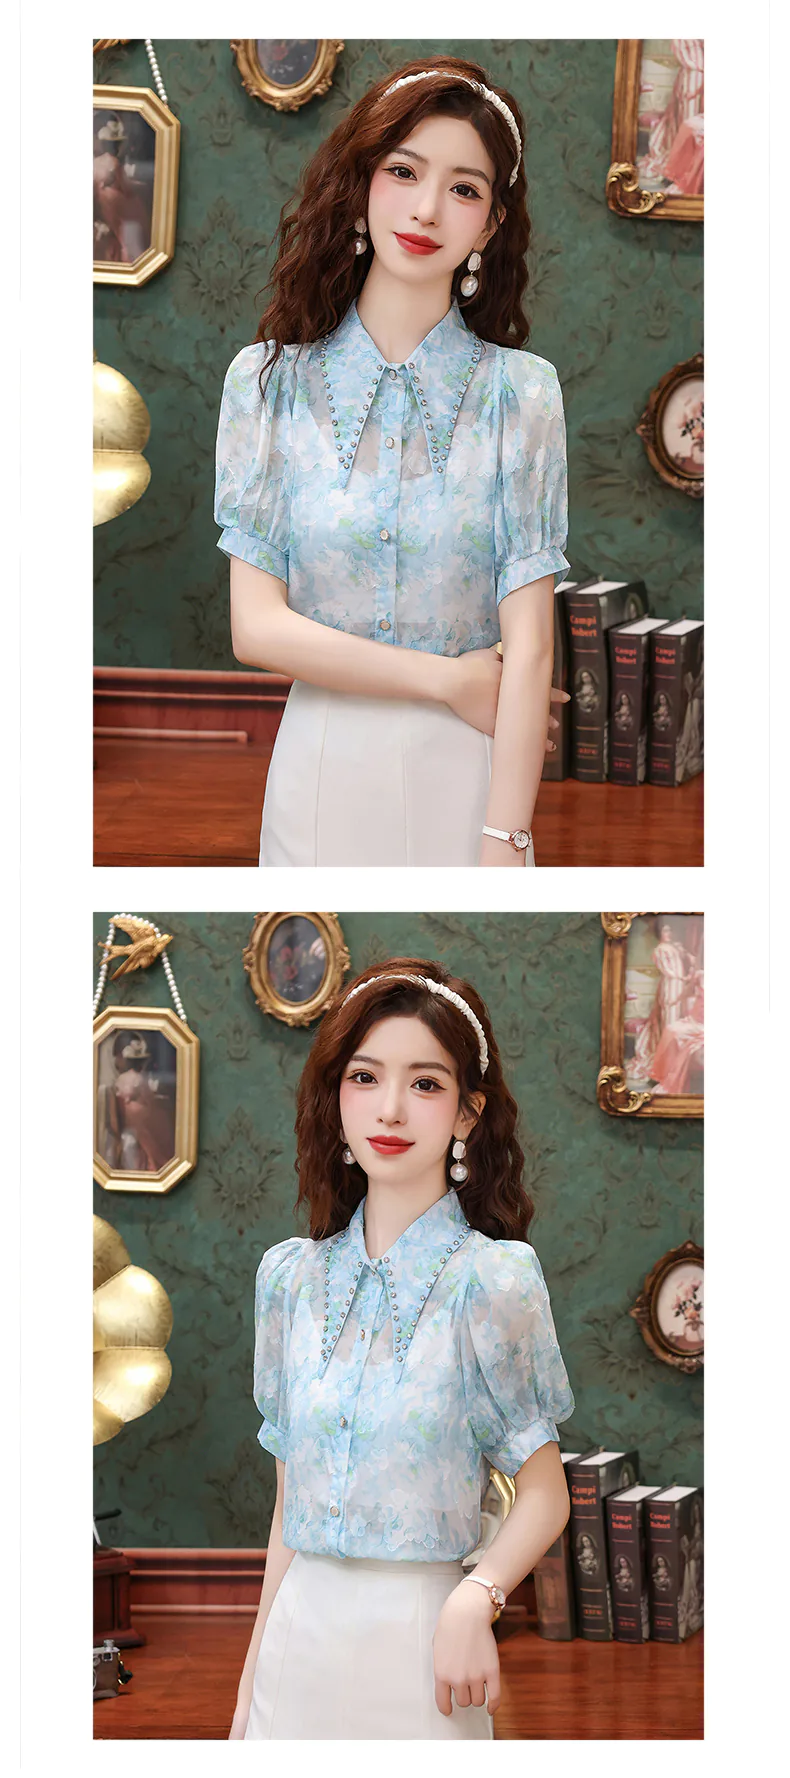 Beautiful-French-Style-Blue-Floral-Chiffon-Shirt-with-Short-Puff-Sleeves17